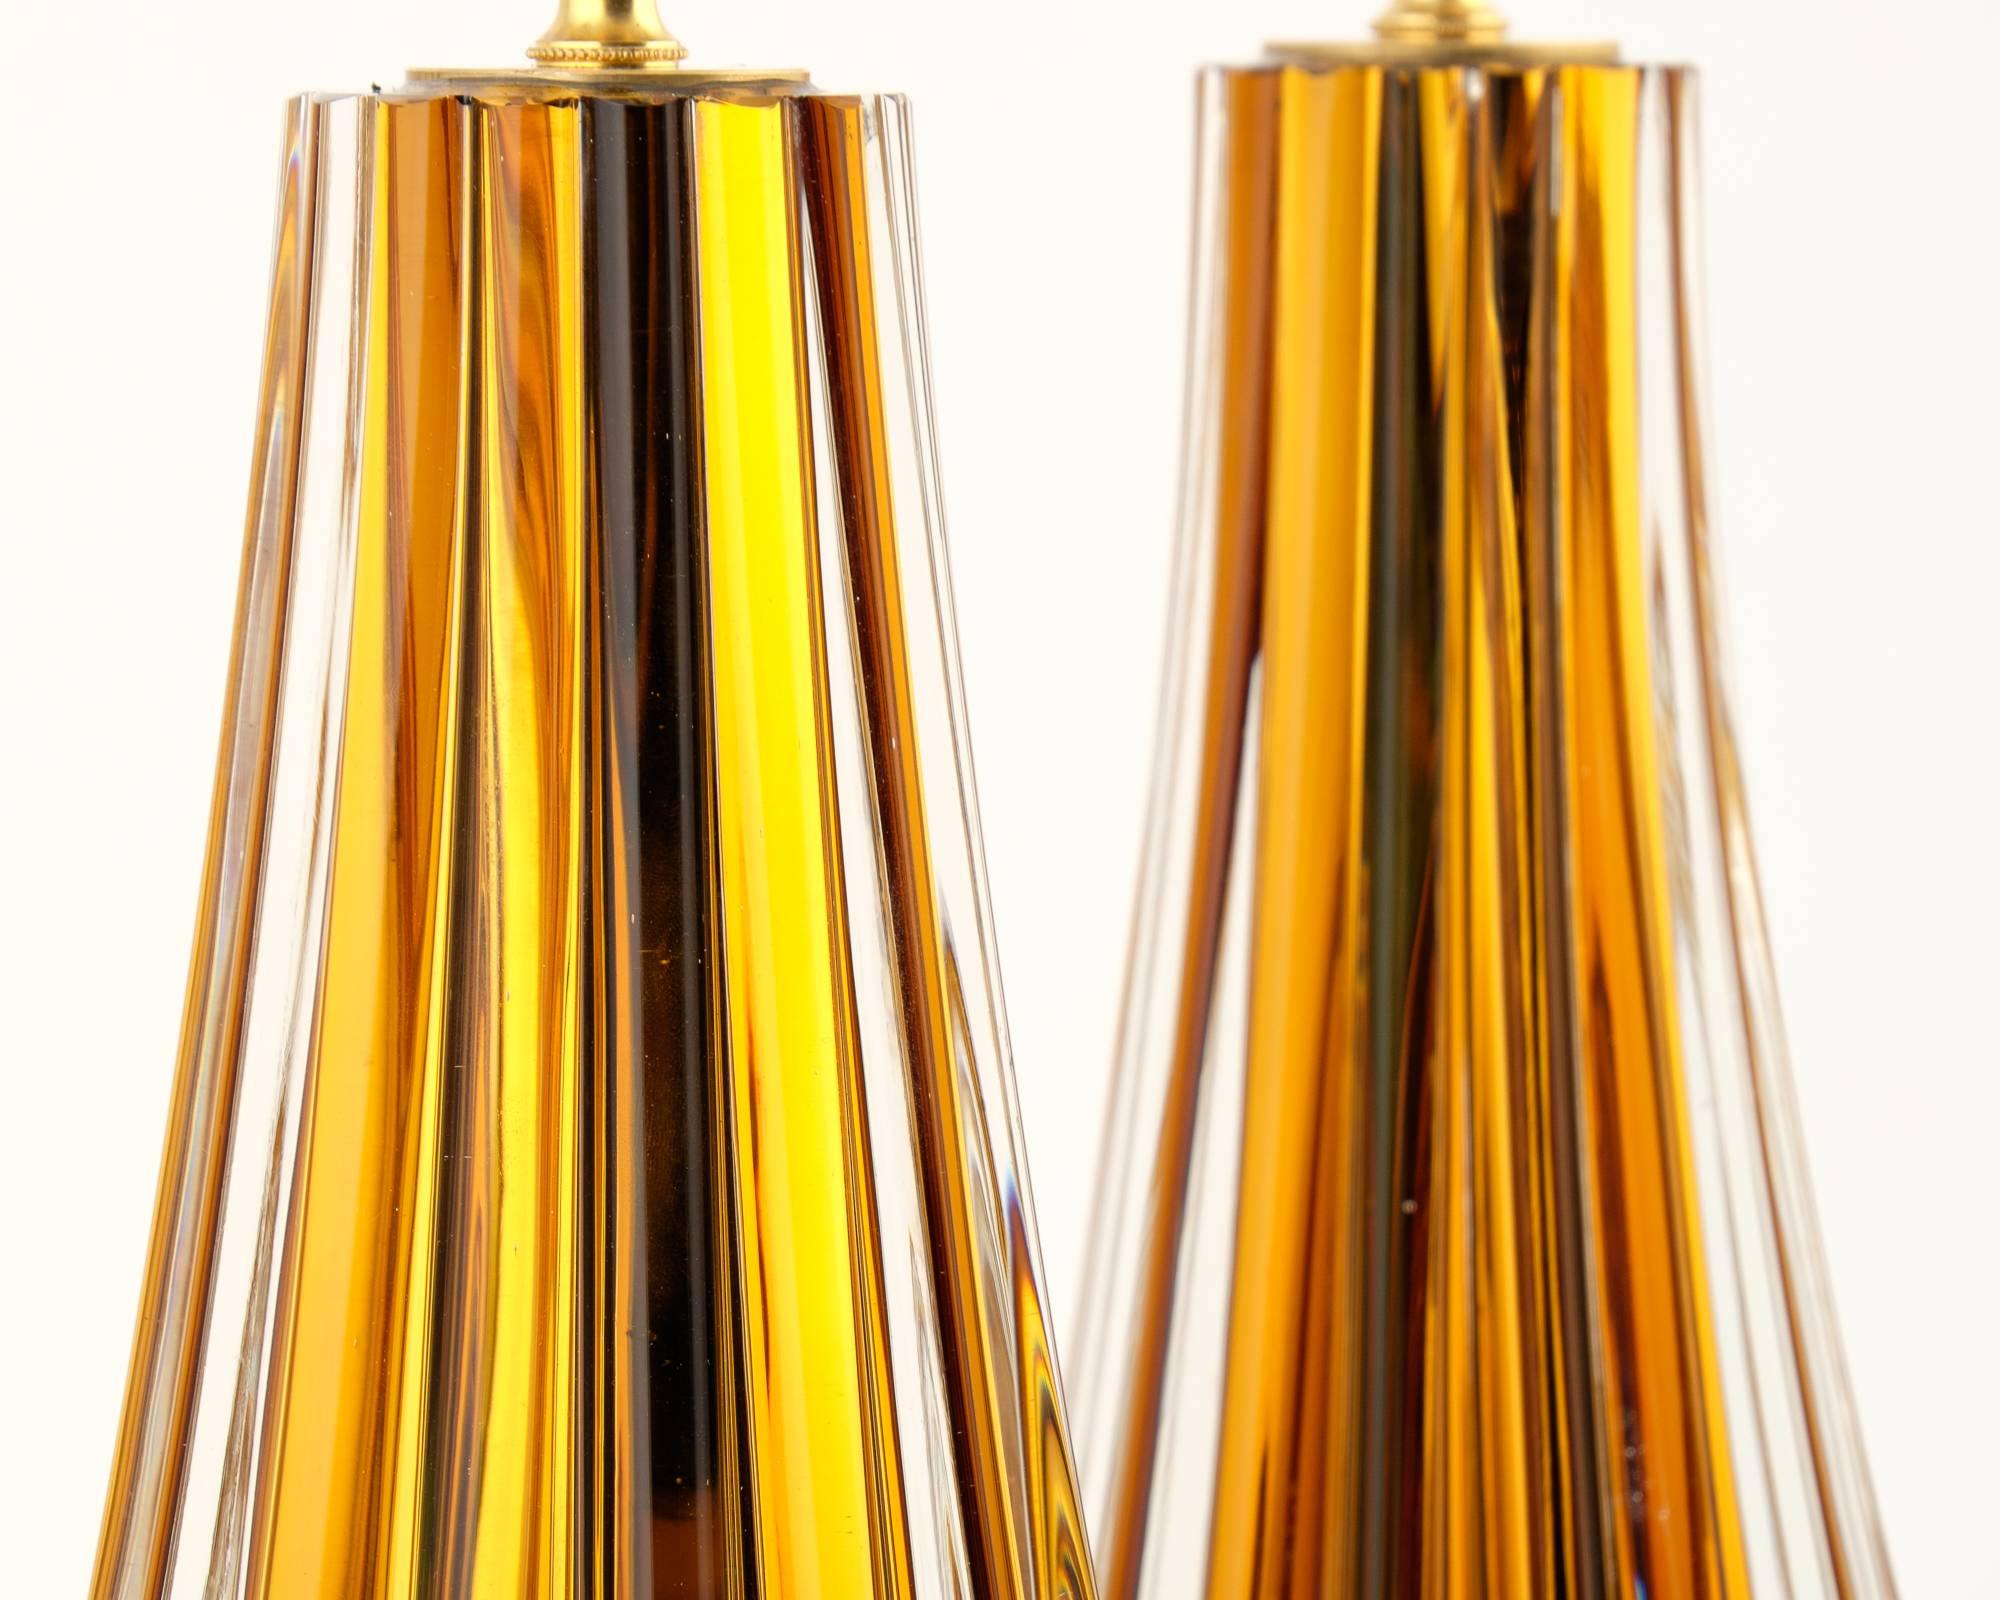 amber table lamp